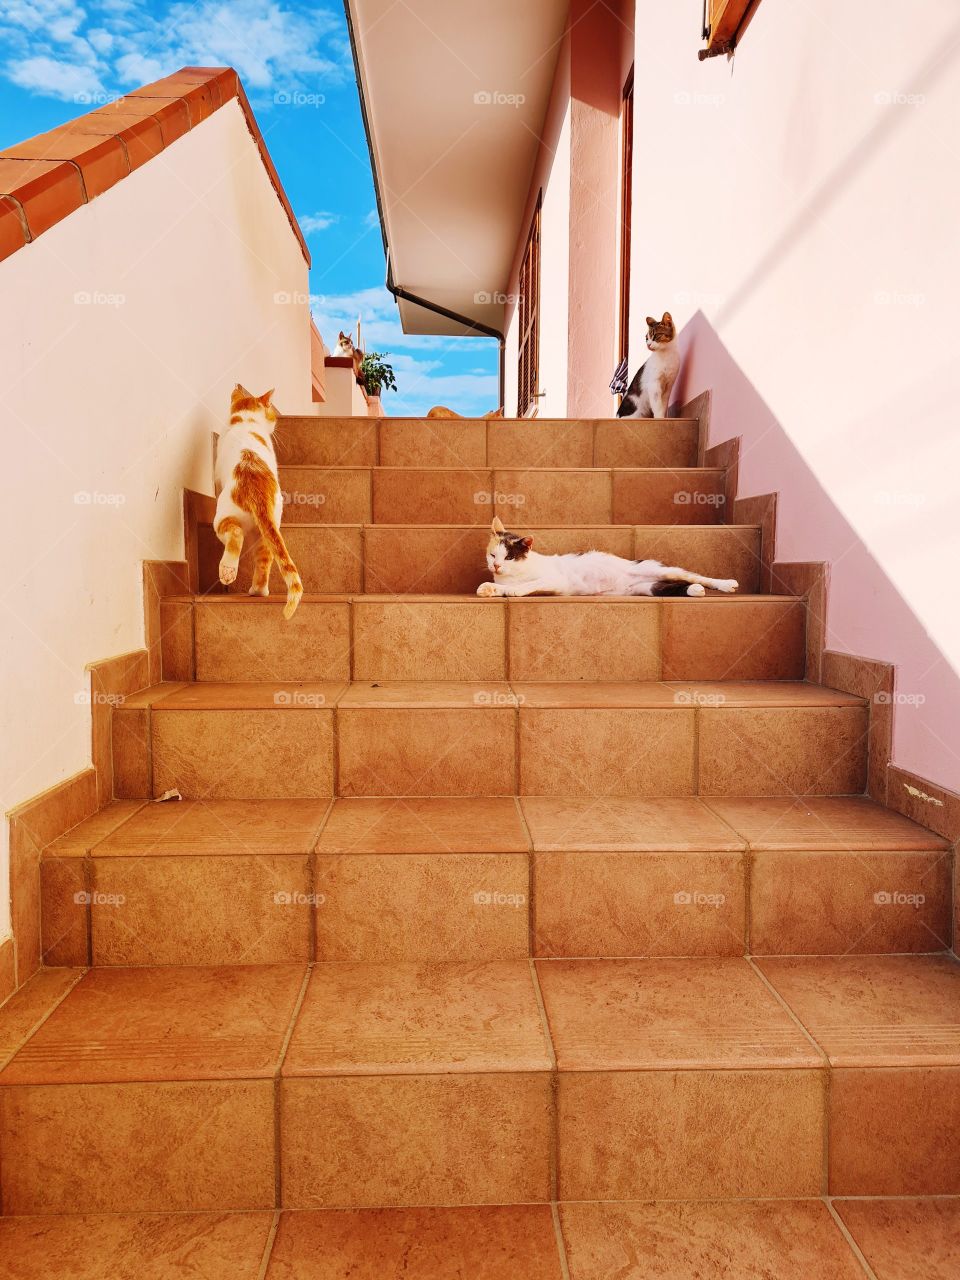 colony of cats goes down and up the stairs of the house